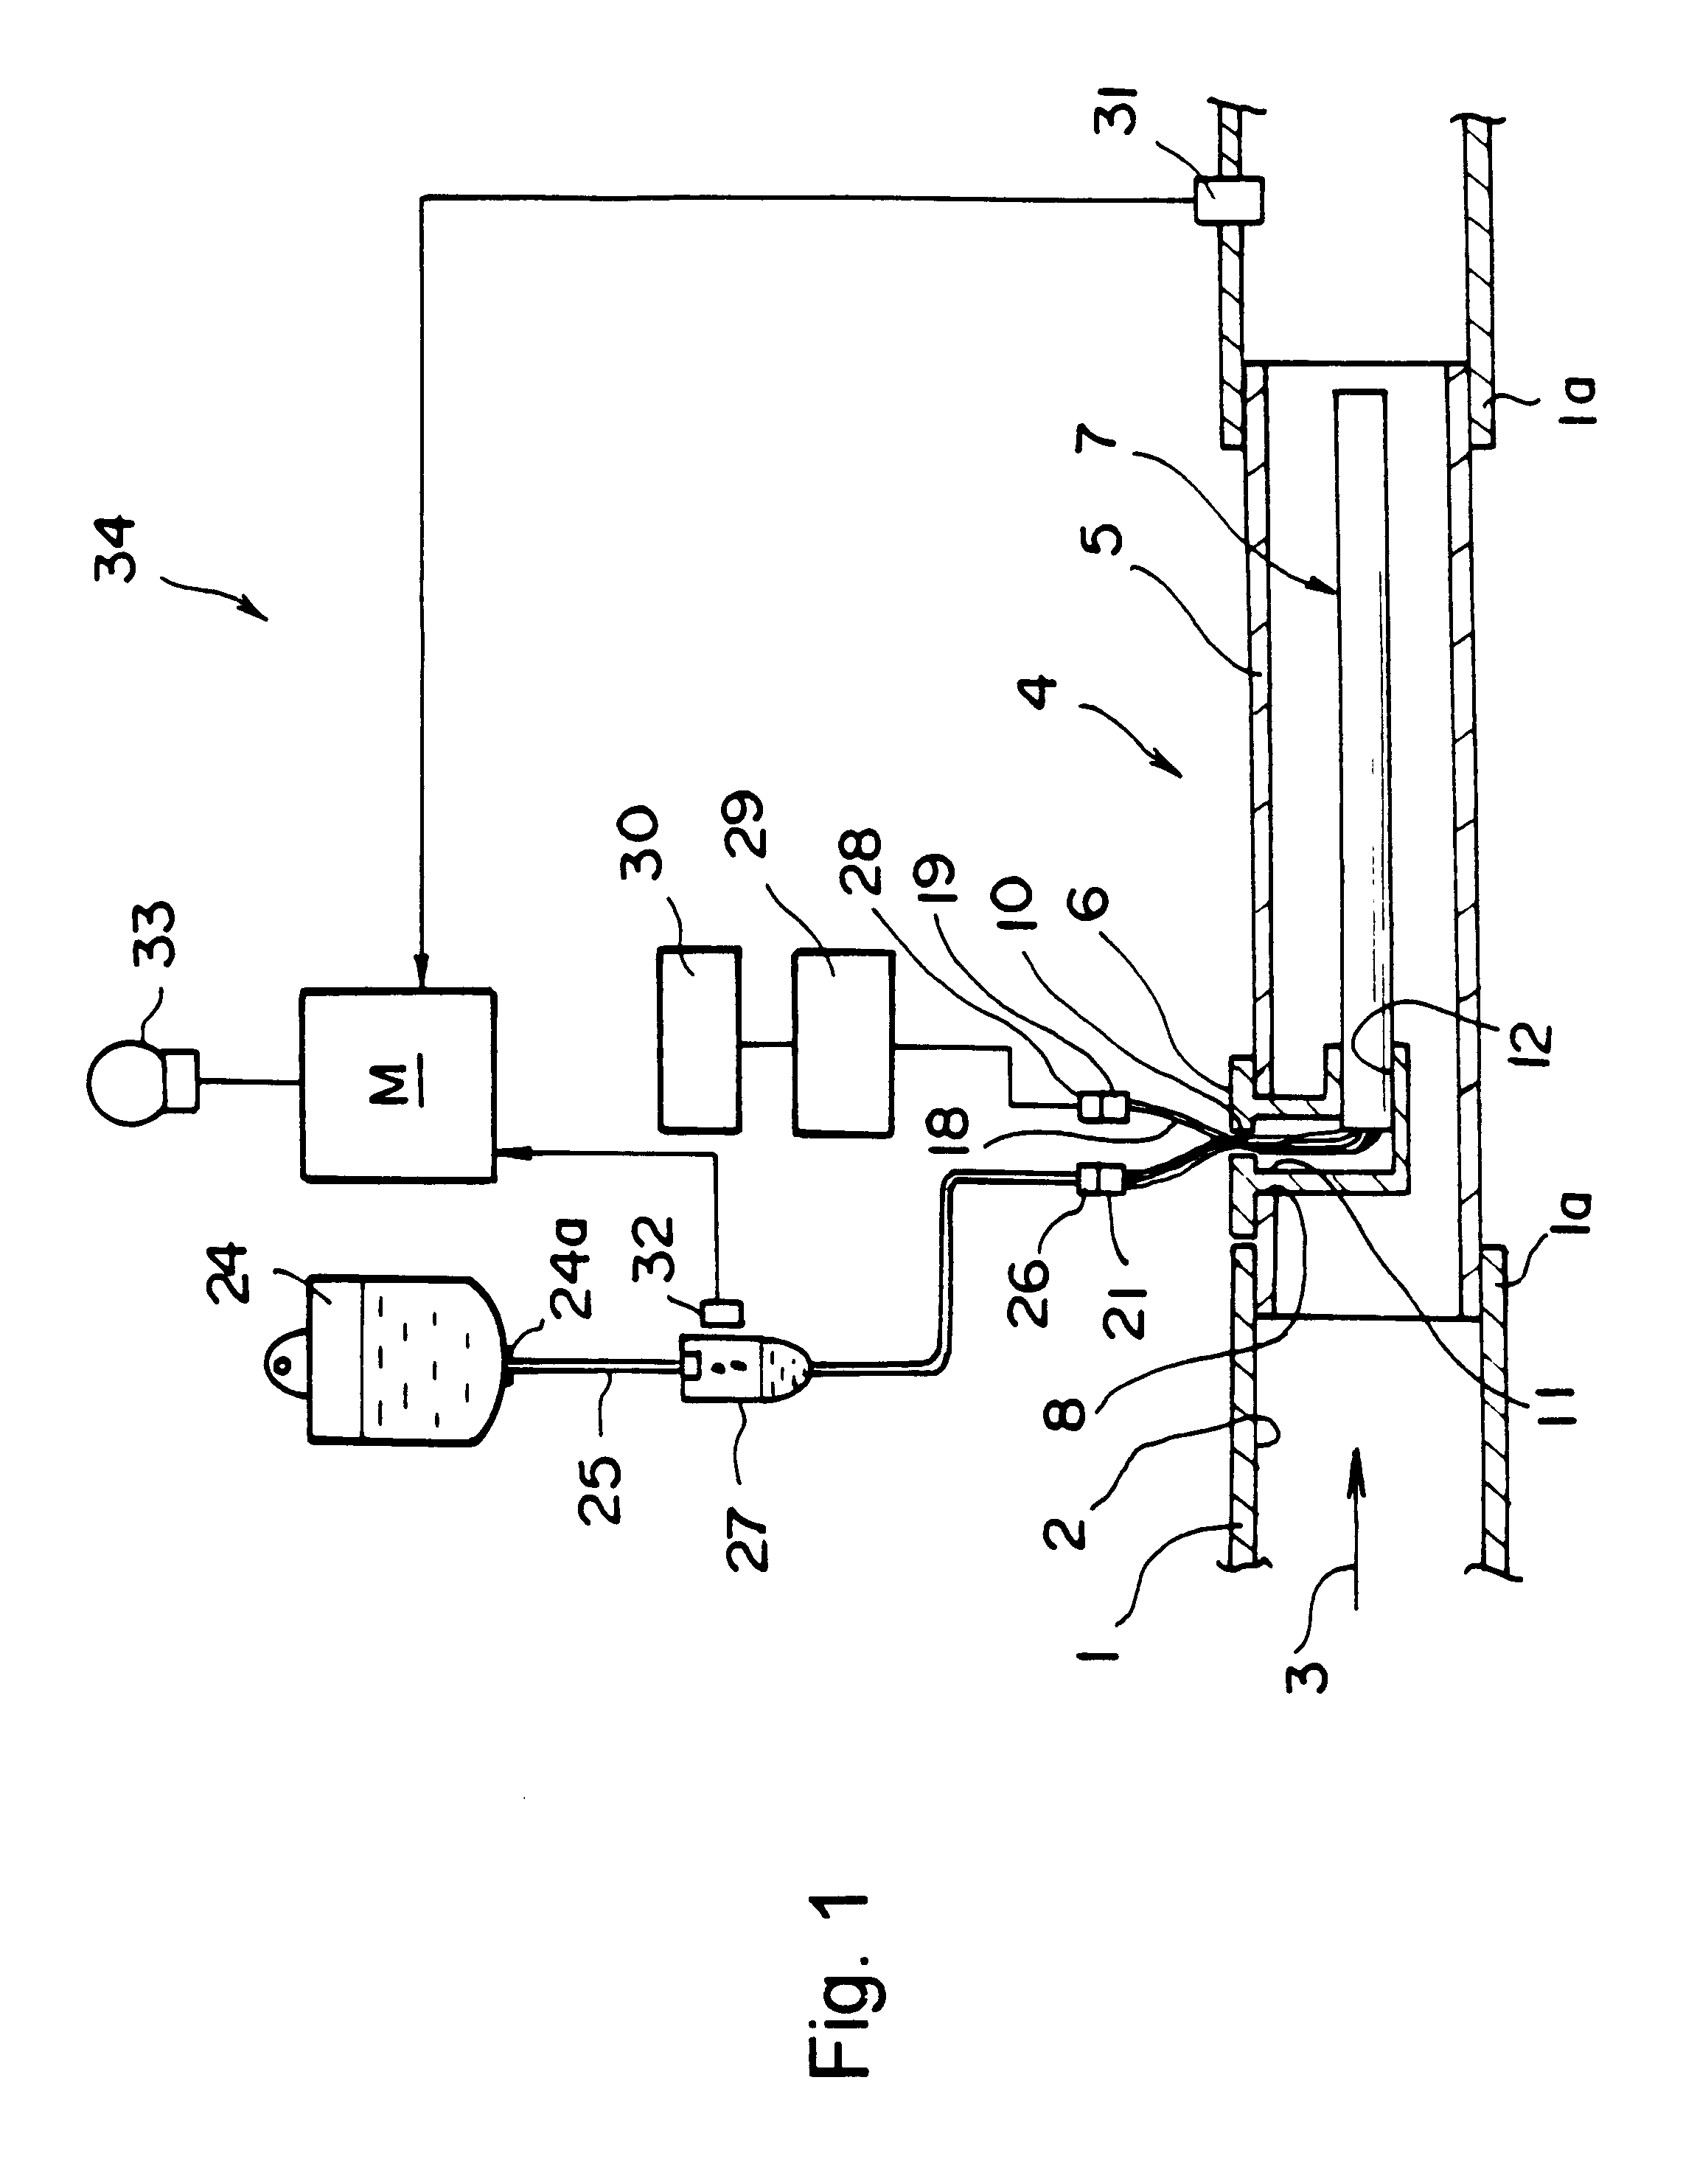 Humidification unit, method of making same, and ventilatory system using such a humidification unit